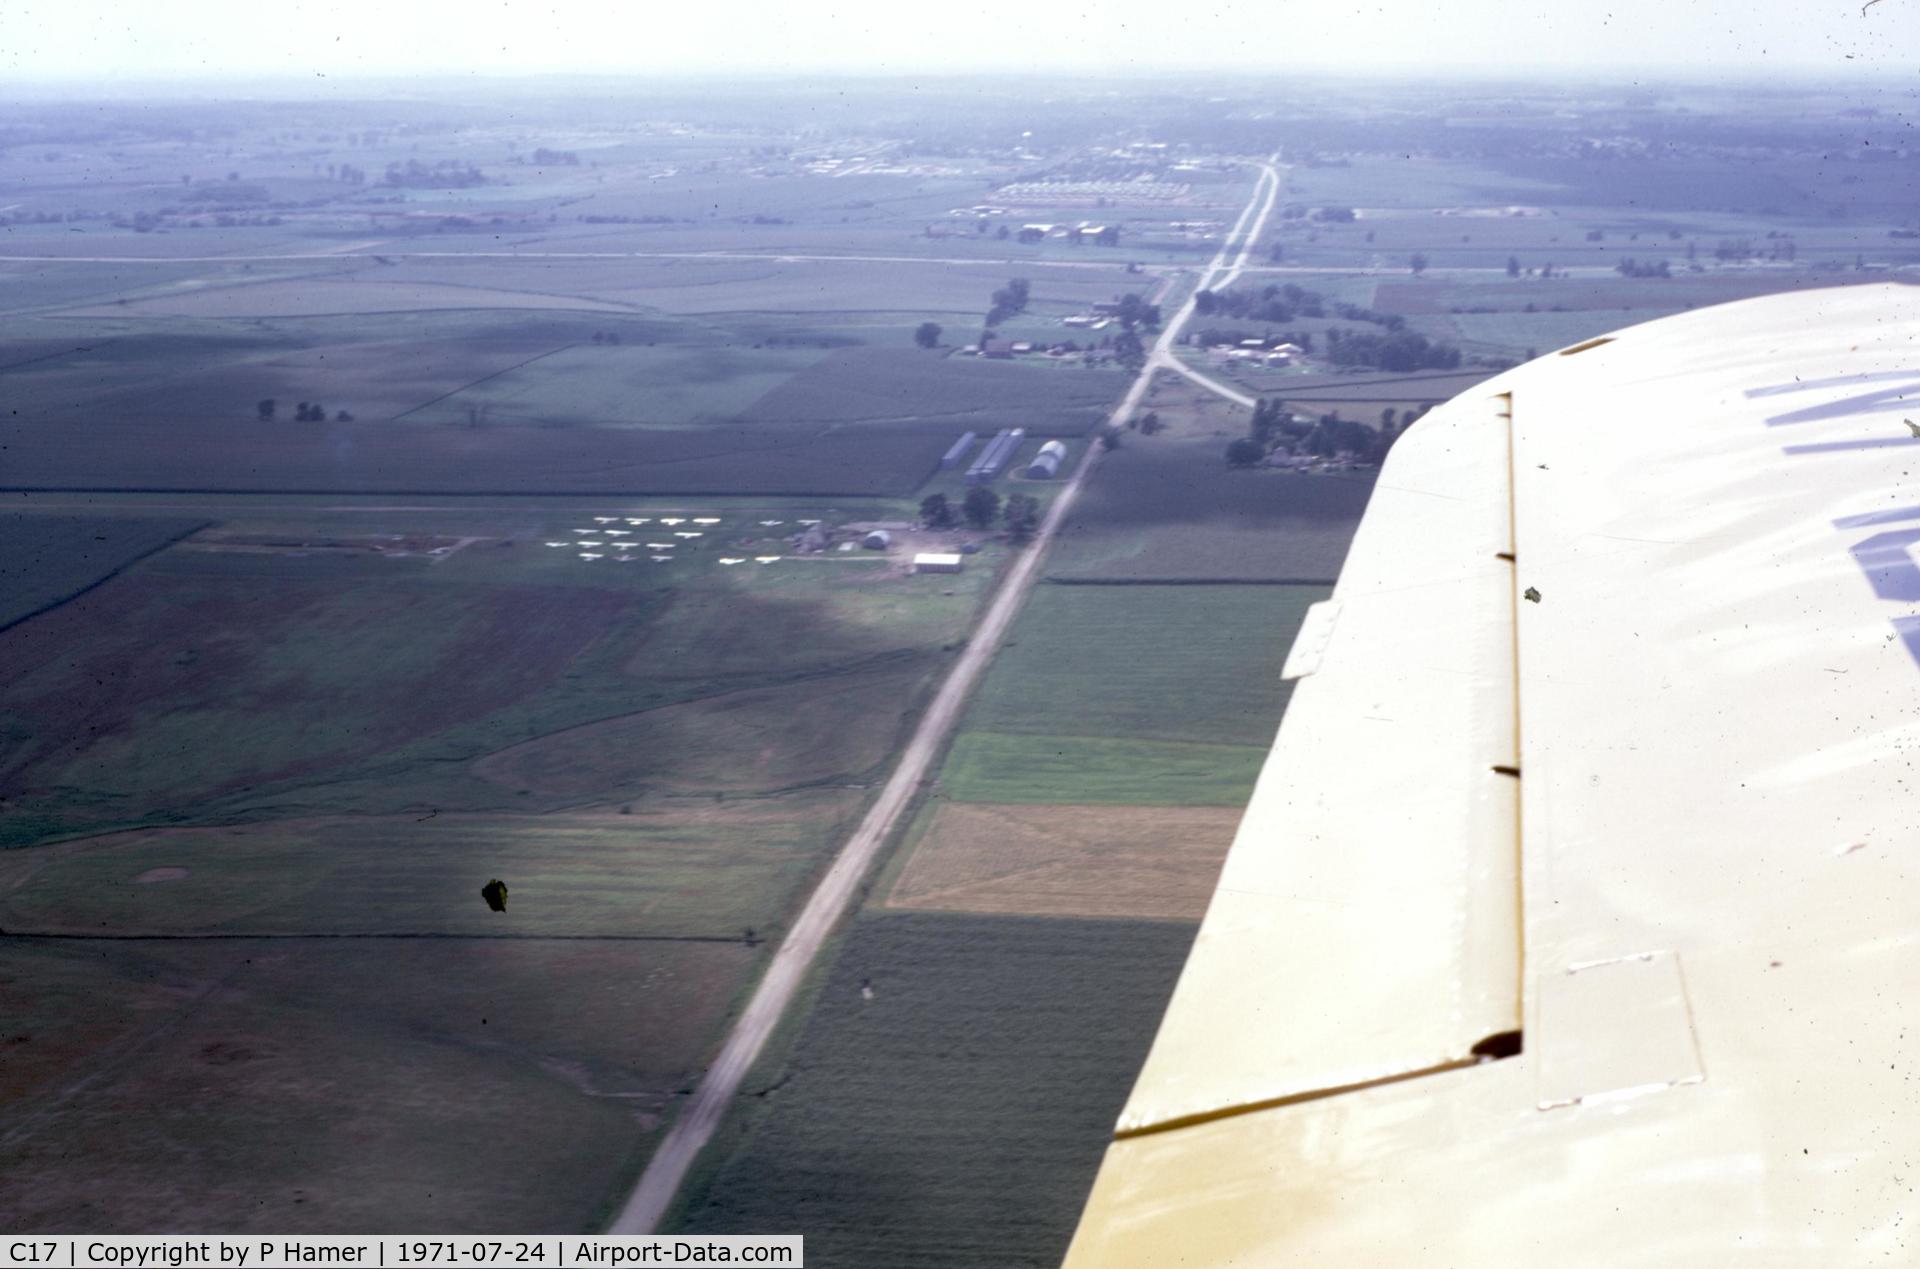 Marion Airport (C17) - Marion, Iowa.Downwind in N74621. Summer 1971. (Thanks Keith!)